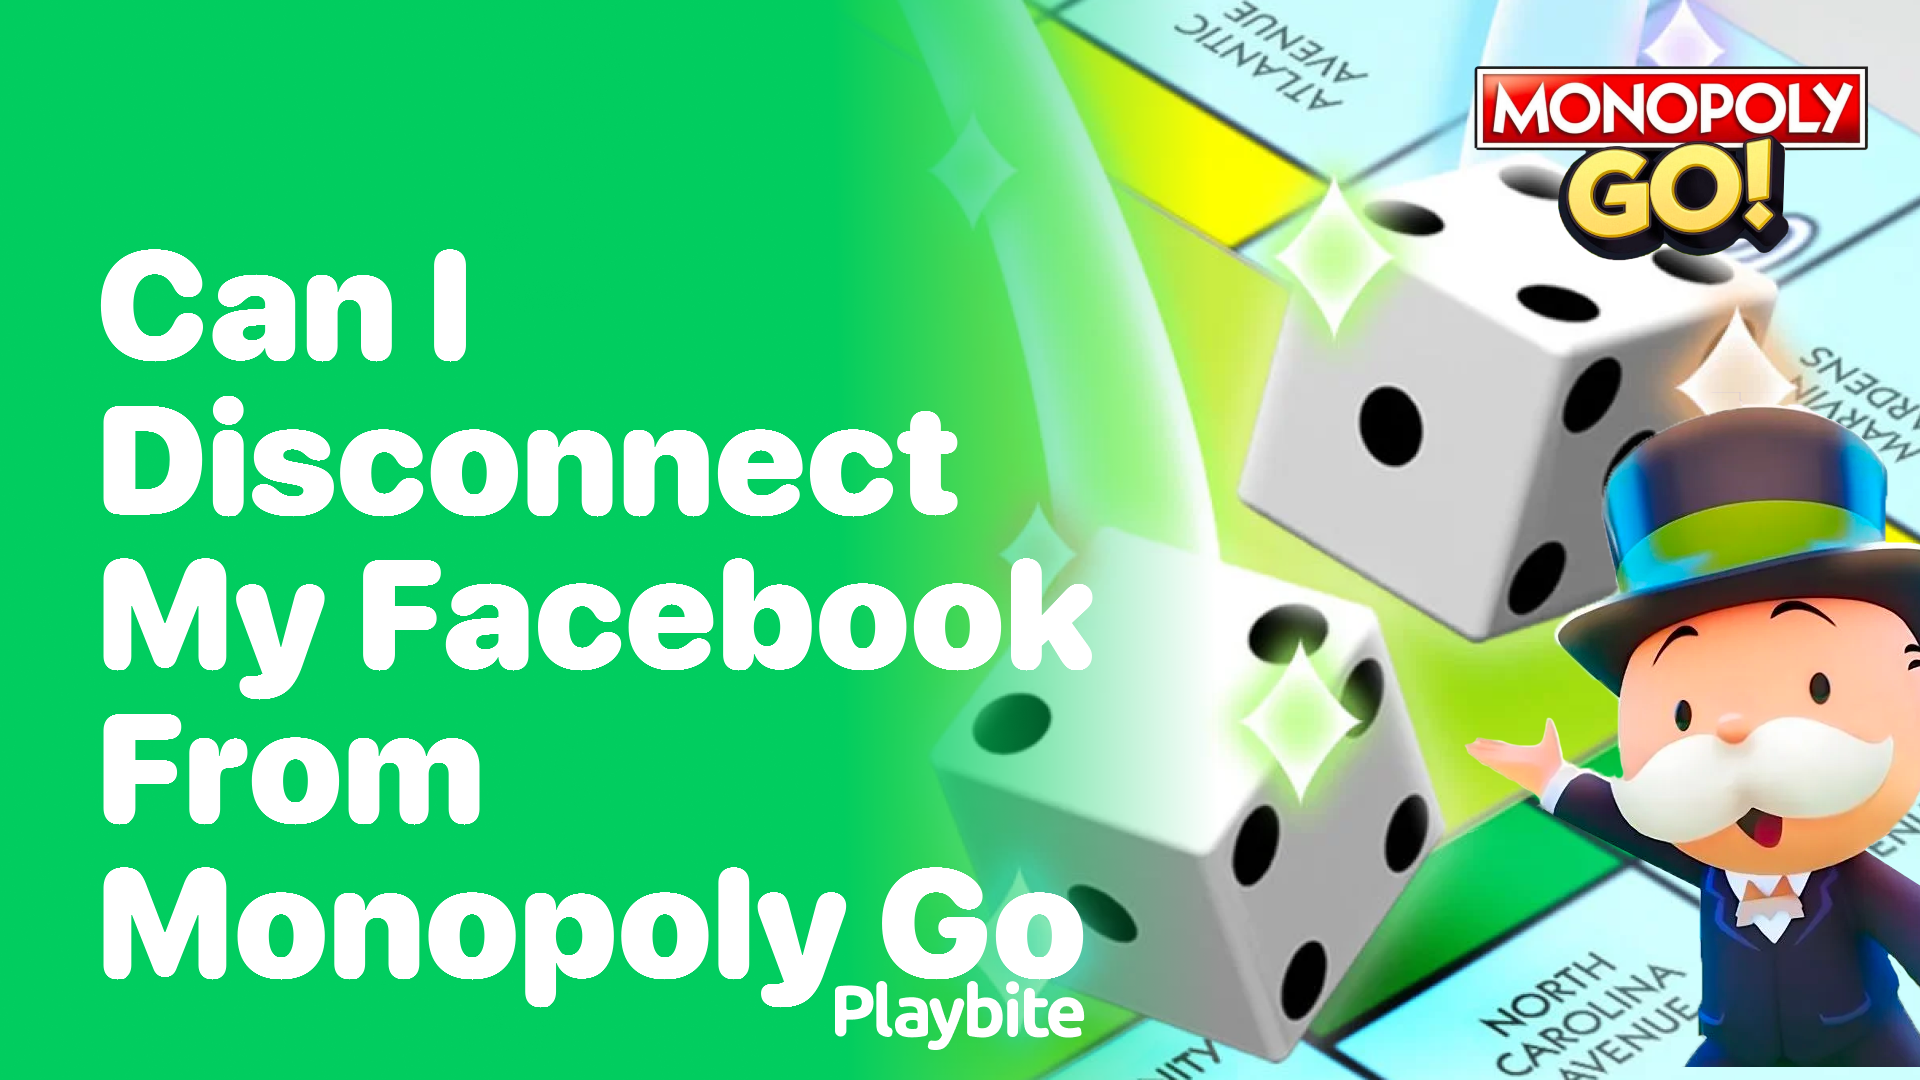 Can I Disconnect My Facebook From Monopoly Go?